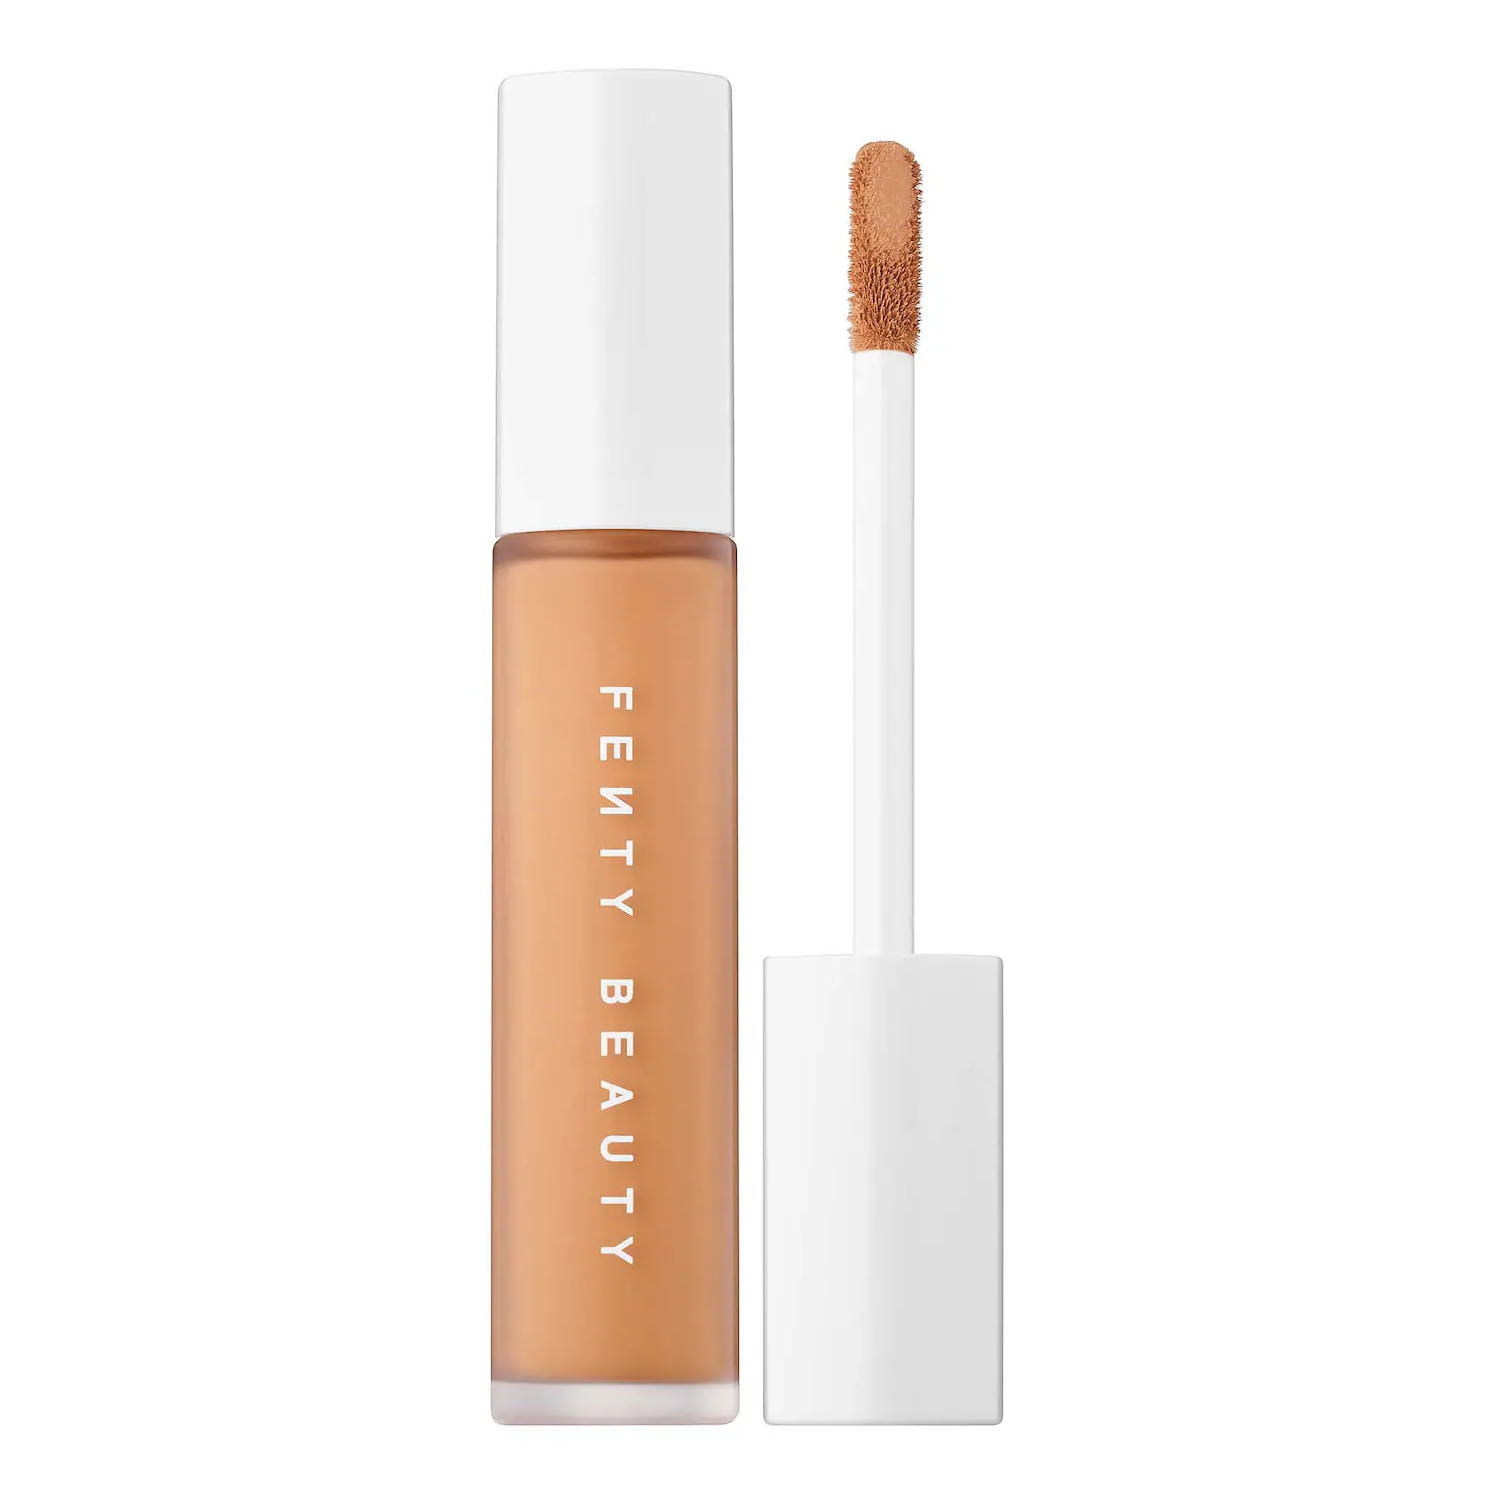 Fenty Beauty Pro Filt'r Concealer in the shade 340